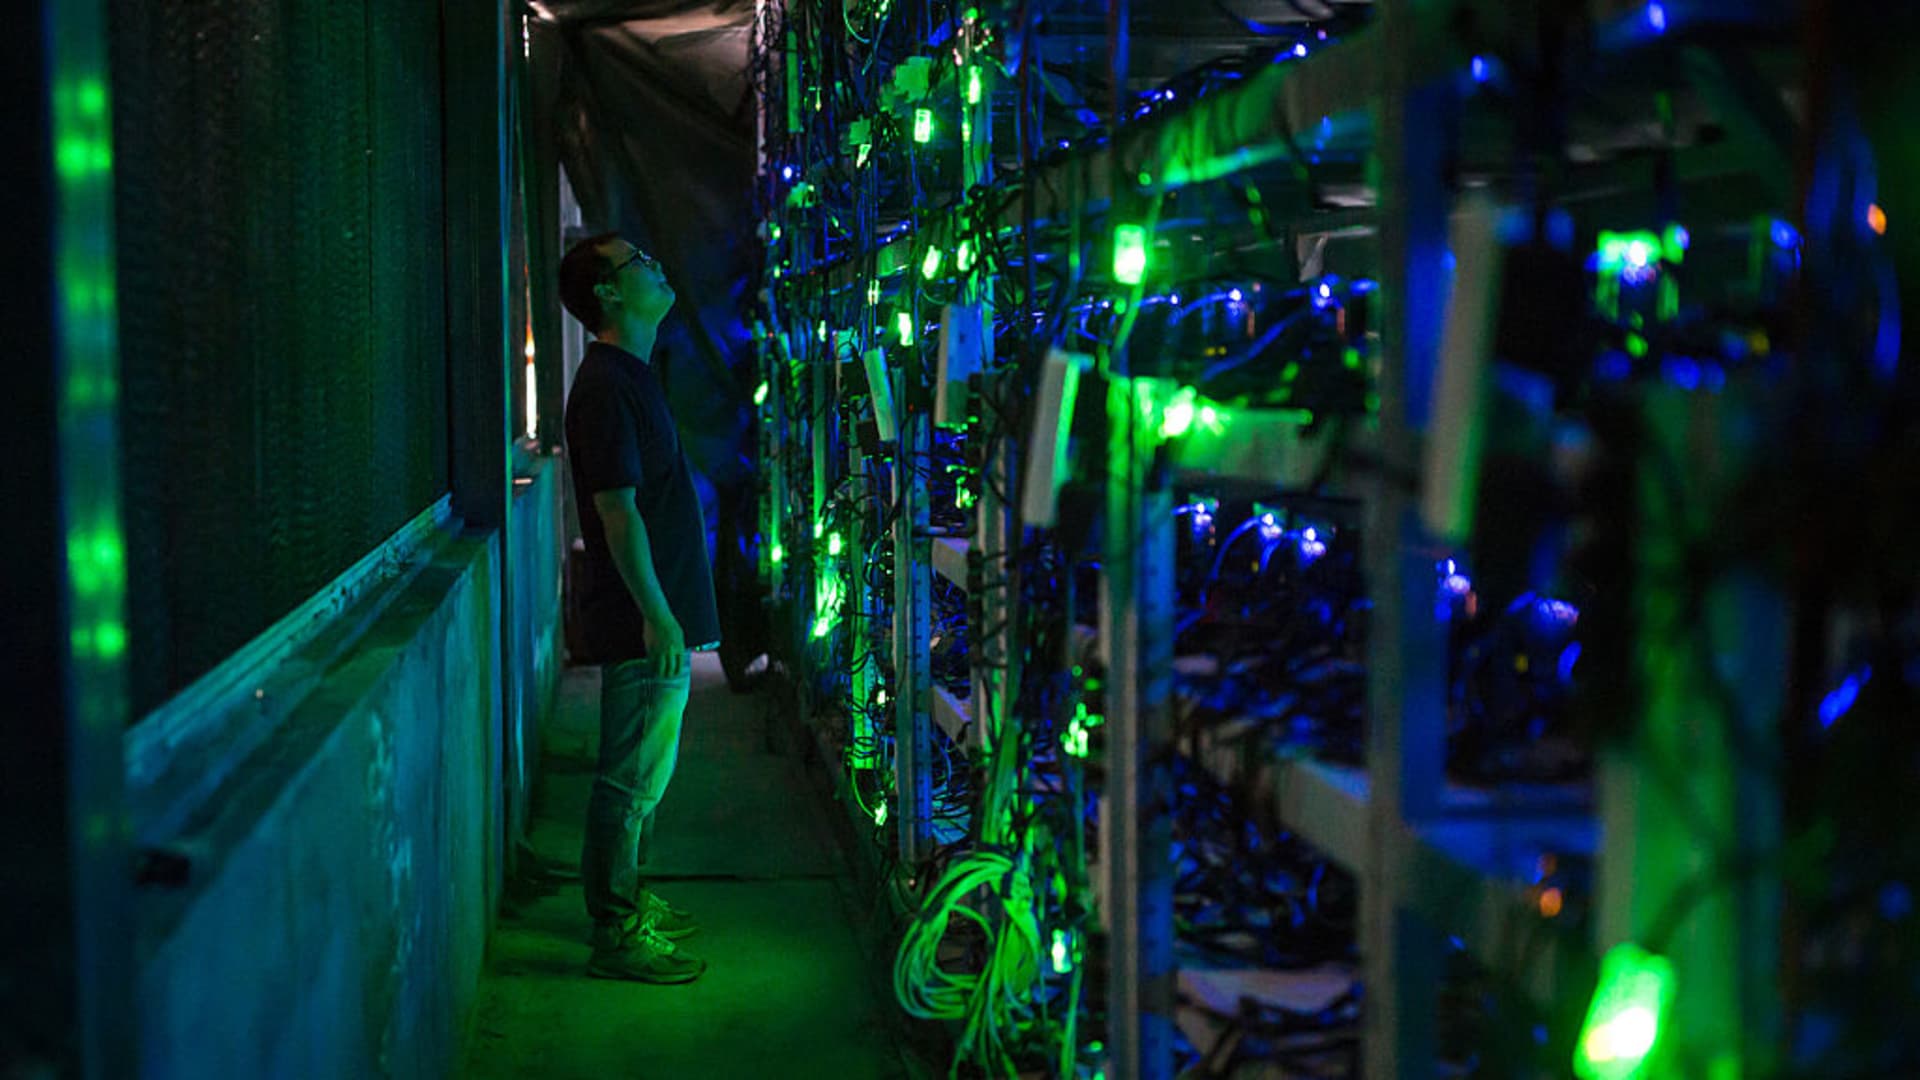 Bitcoin mining is now easier and more profitable as algorithm adjusts after China crackdown